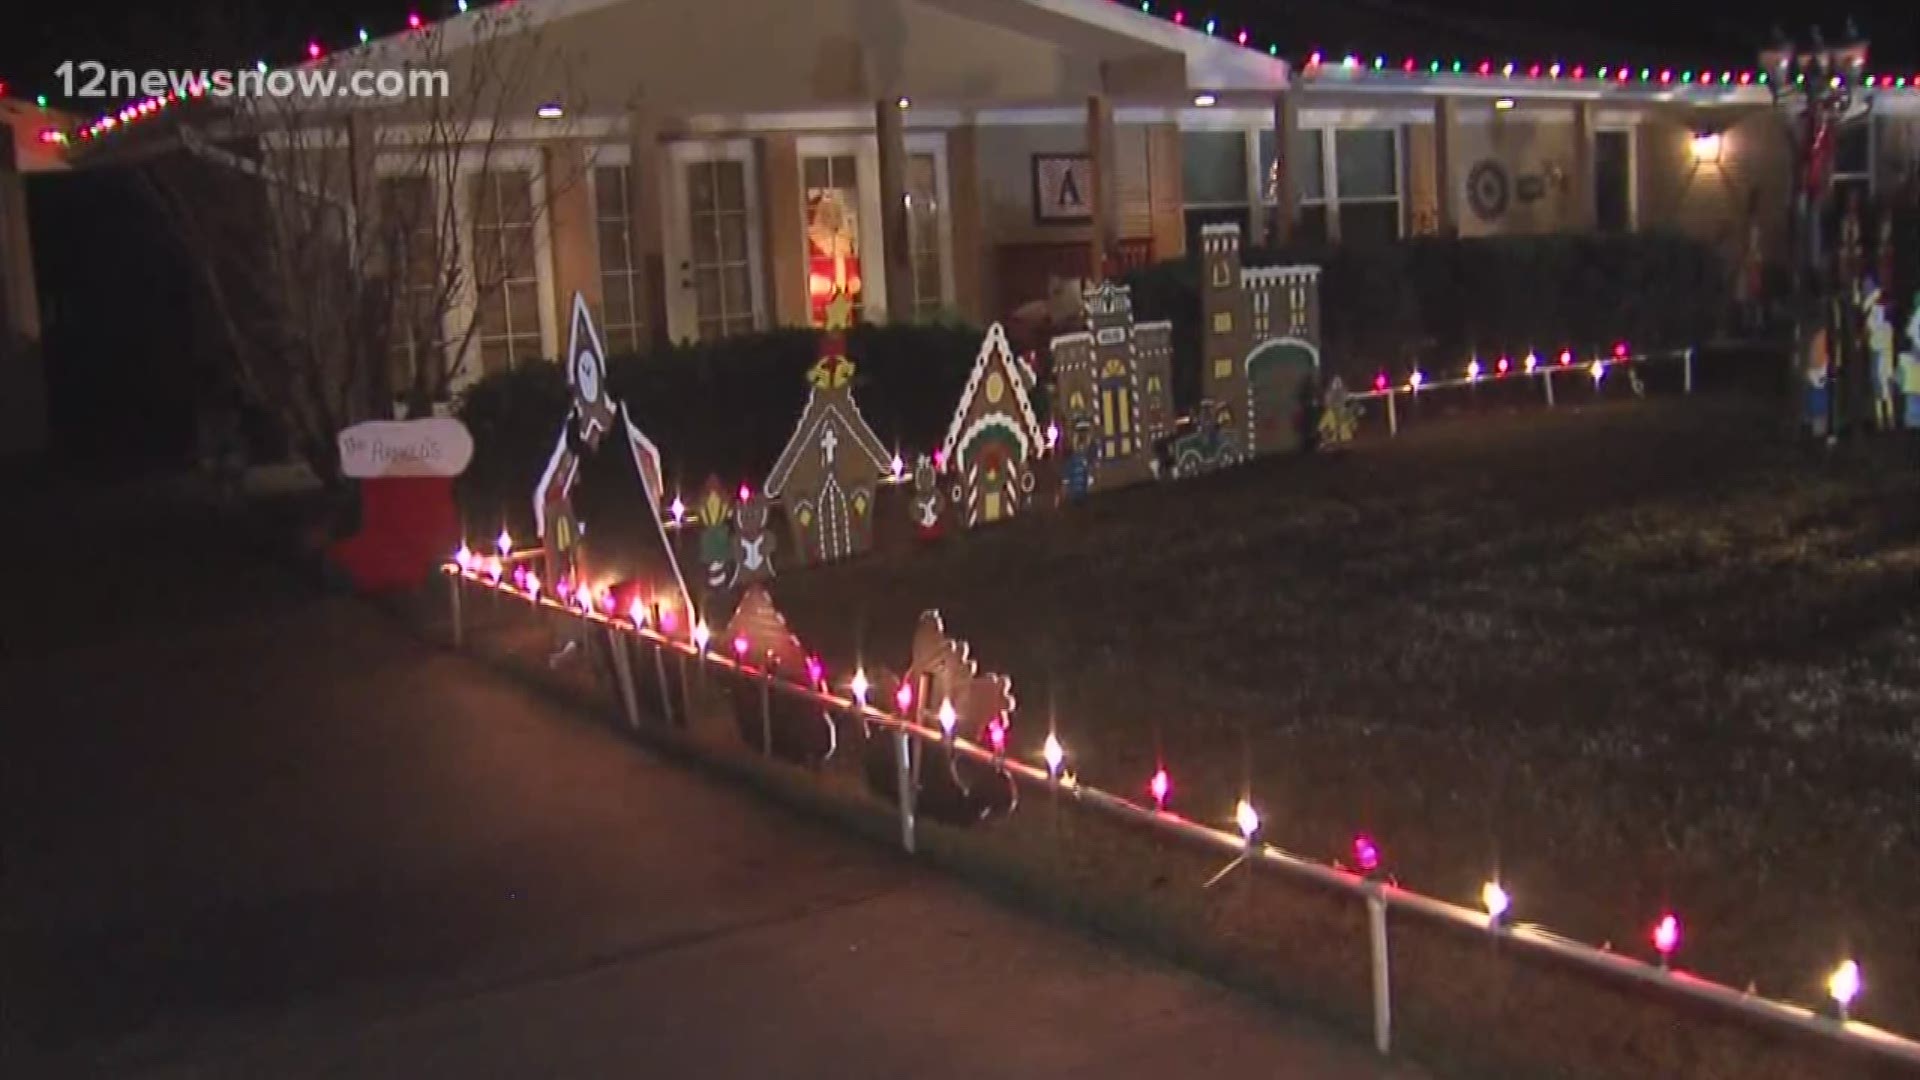 12News reporter Rachel Keller visits a family's home in Port Neches that has been decorated during the Christmas season for 35 years.